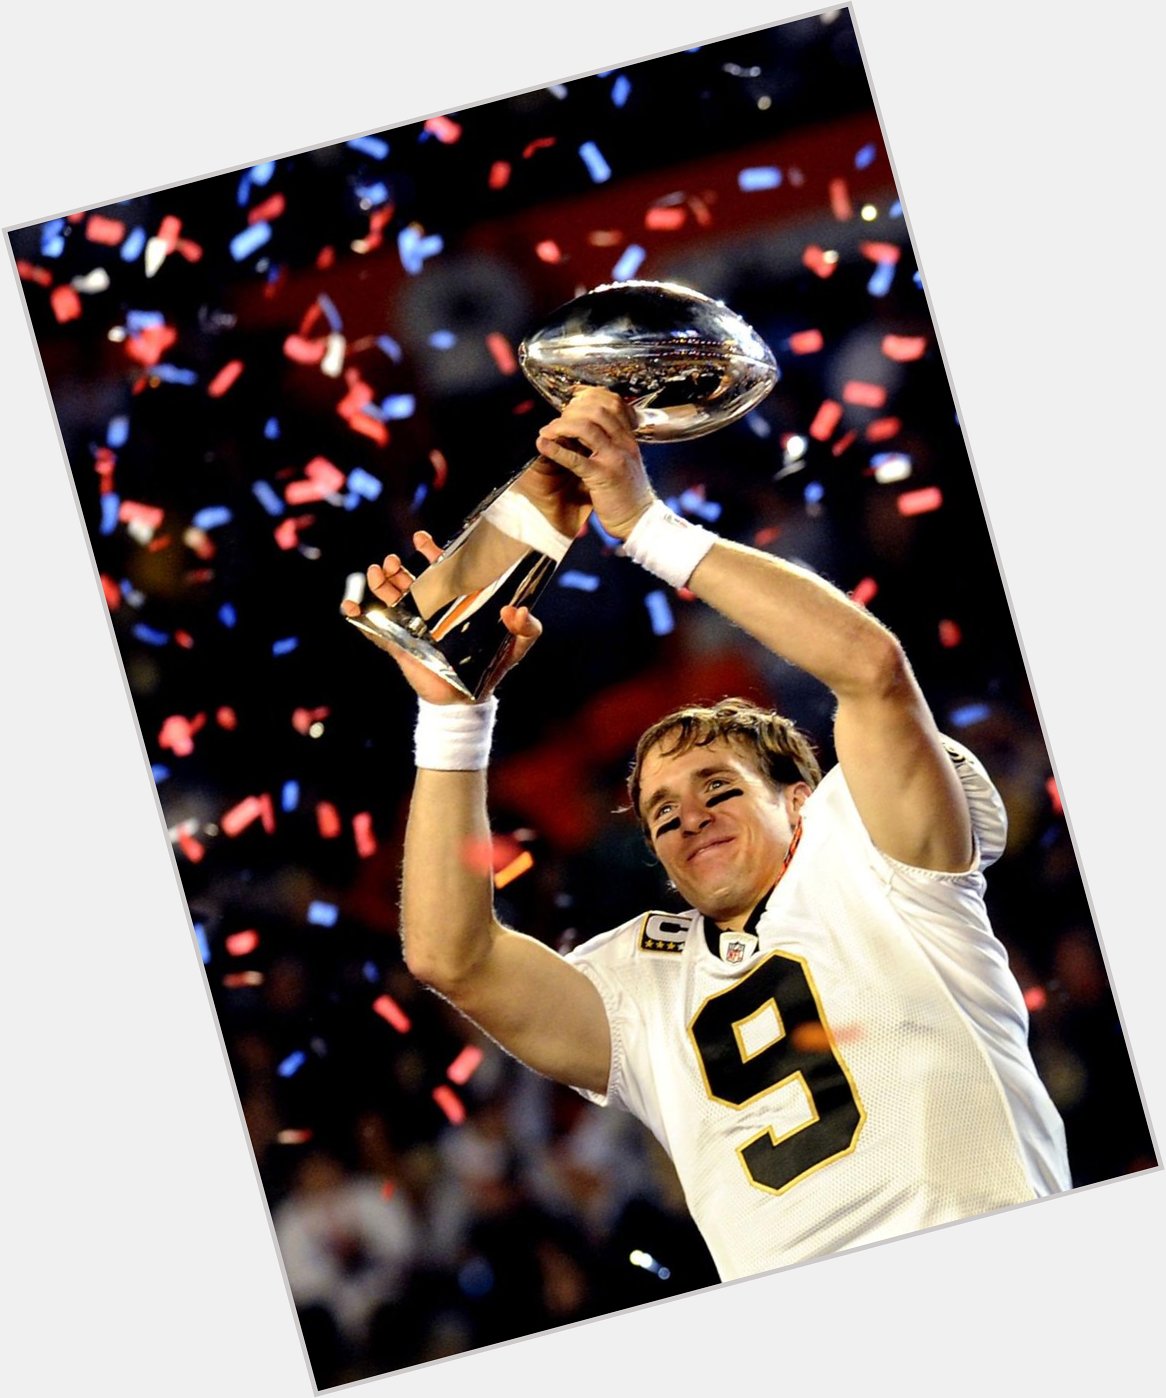 Happy 40th birthday to New Orleans QB, and one of the best to ever play, Drew Brees. 